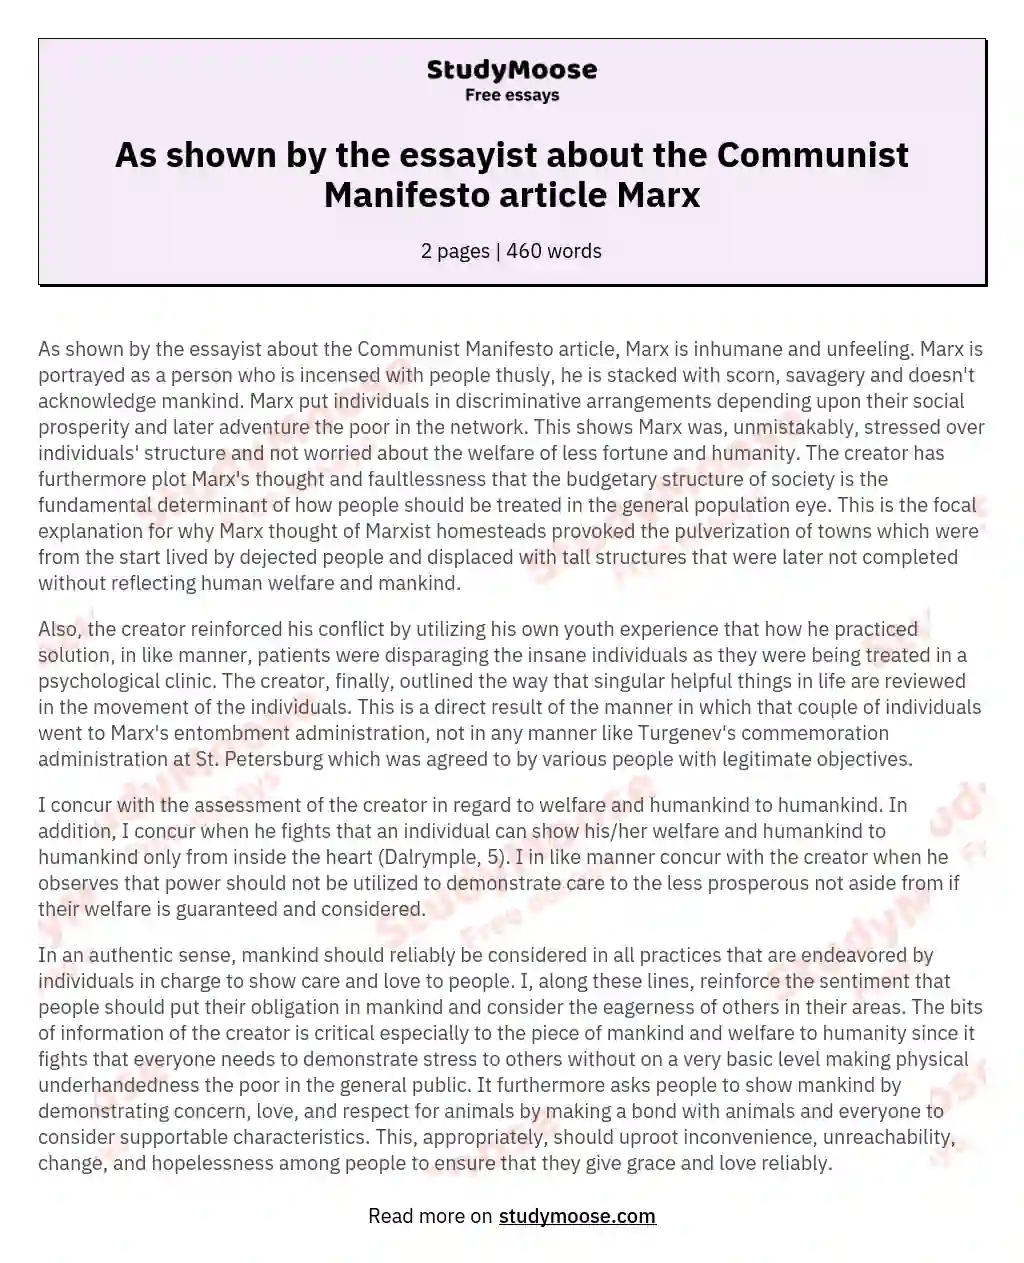 As shown by the essayist about the Communist Manifesto article Marx essay